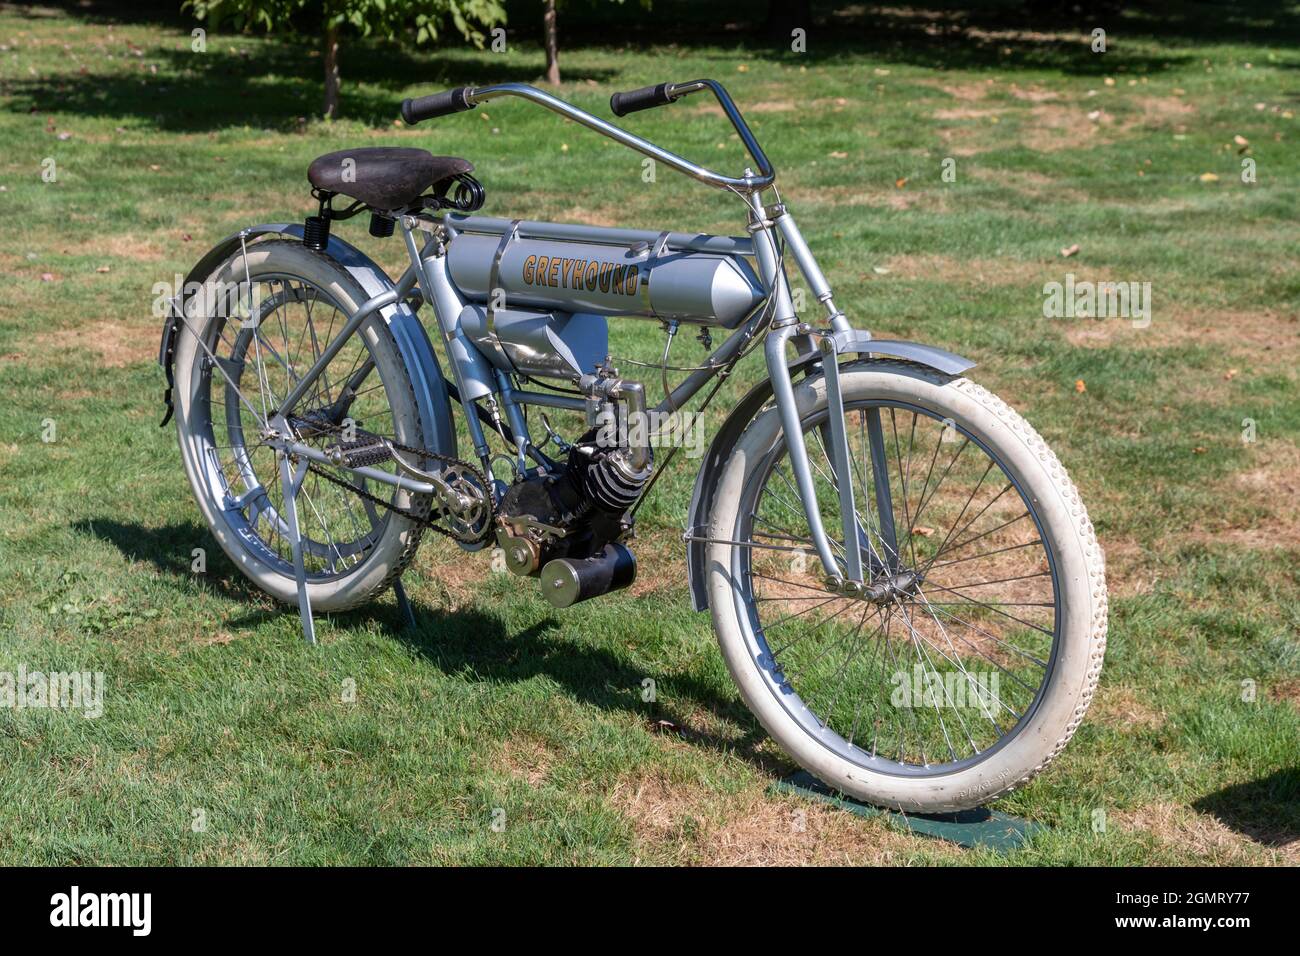 Grosse Pointe Shores, Michigan - The 1909 Greyhound motorcycle at the Eyes on Design auto show. Stock Photo